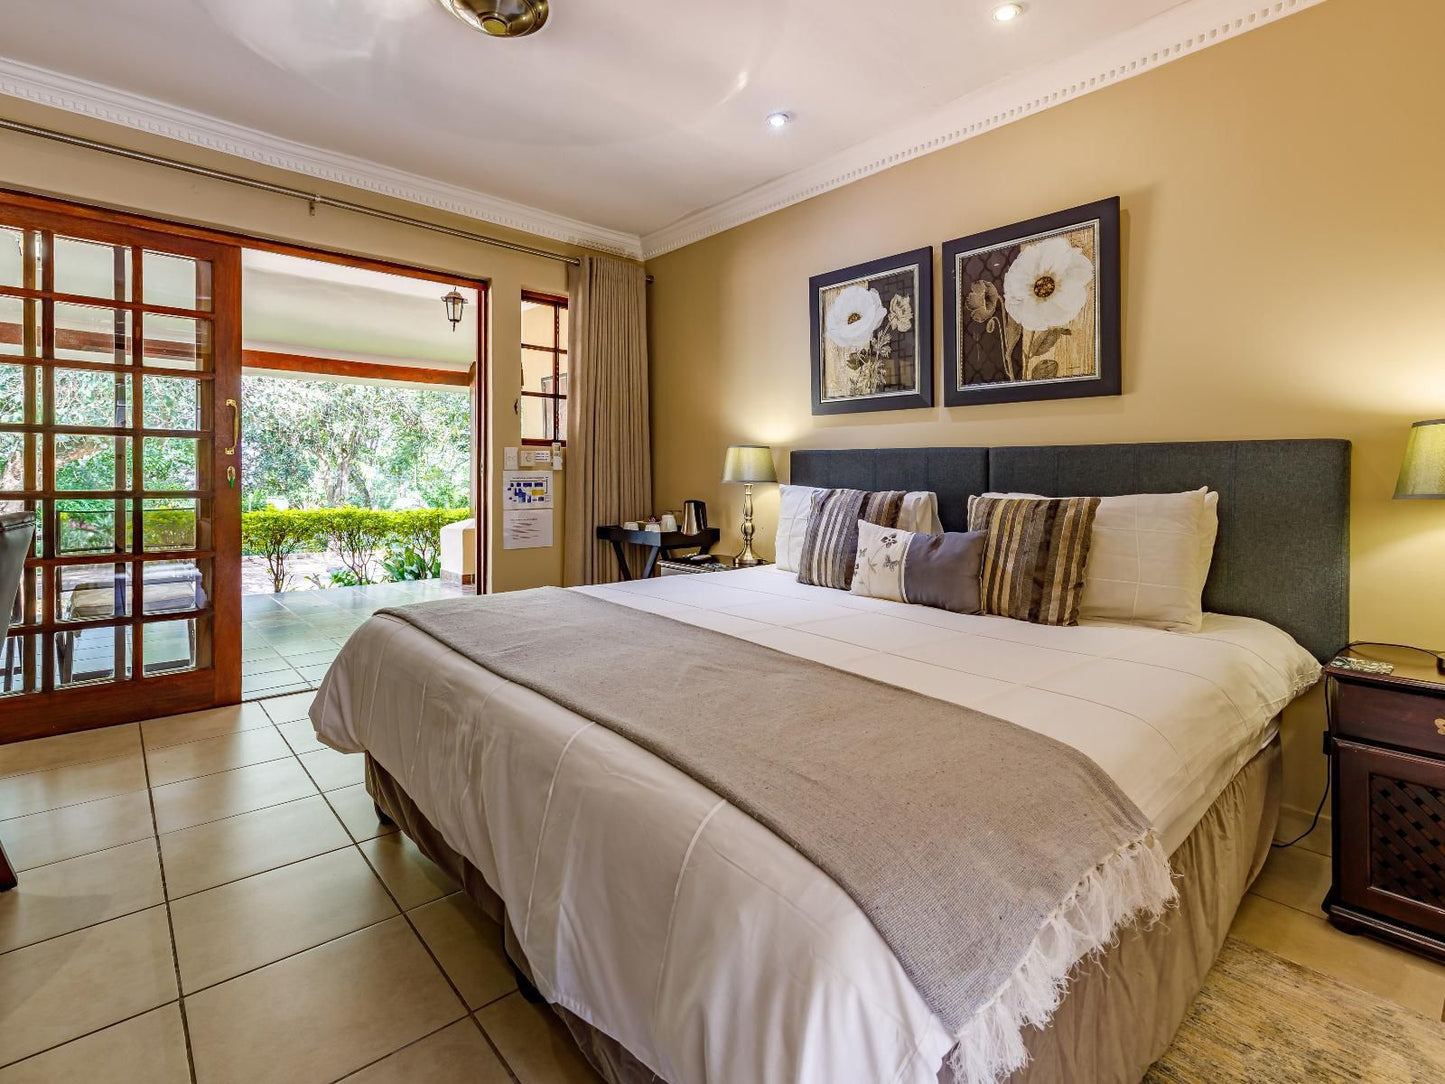 Country Lane Lodge White River Mpumalanga South Africa Bedroom